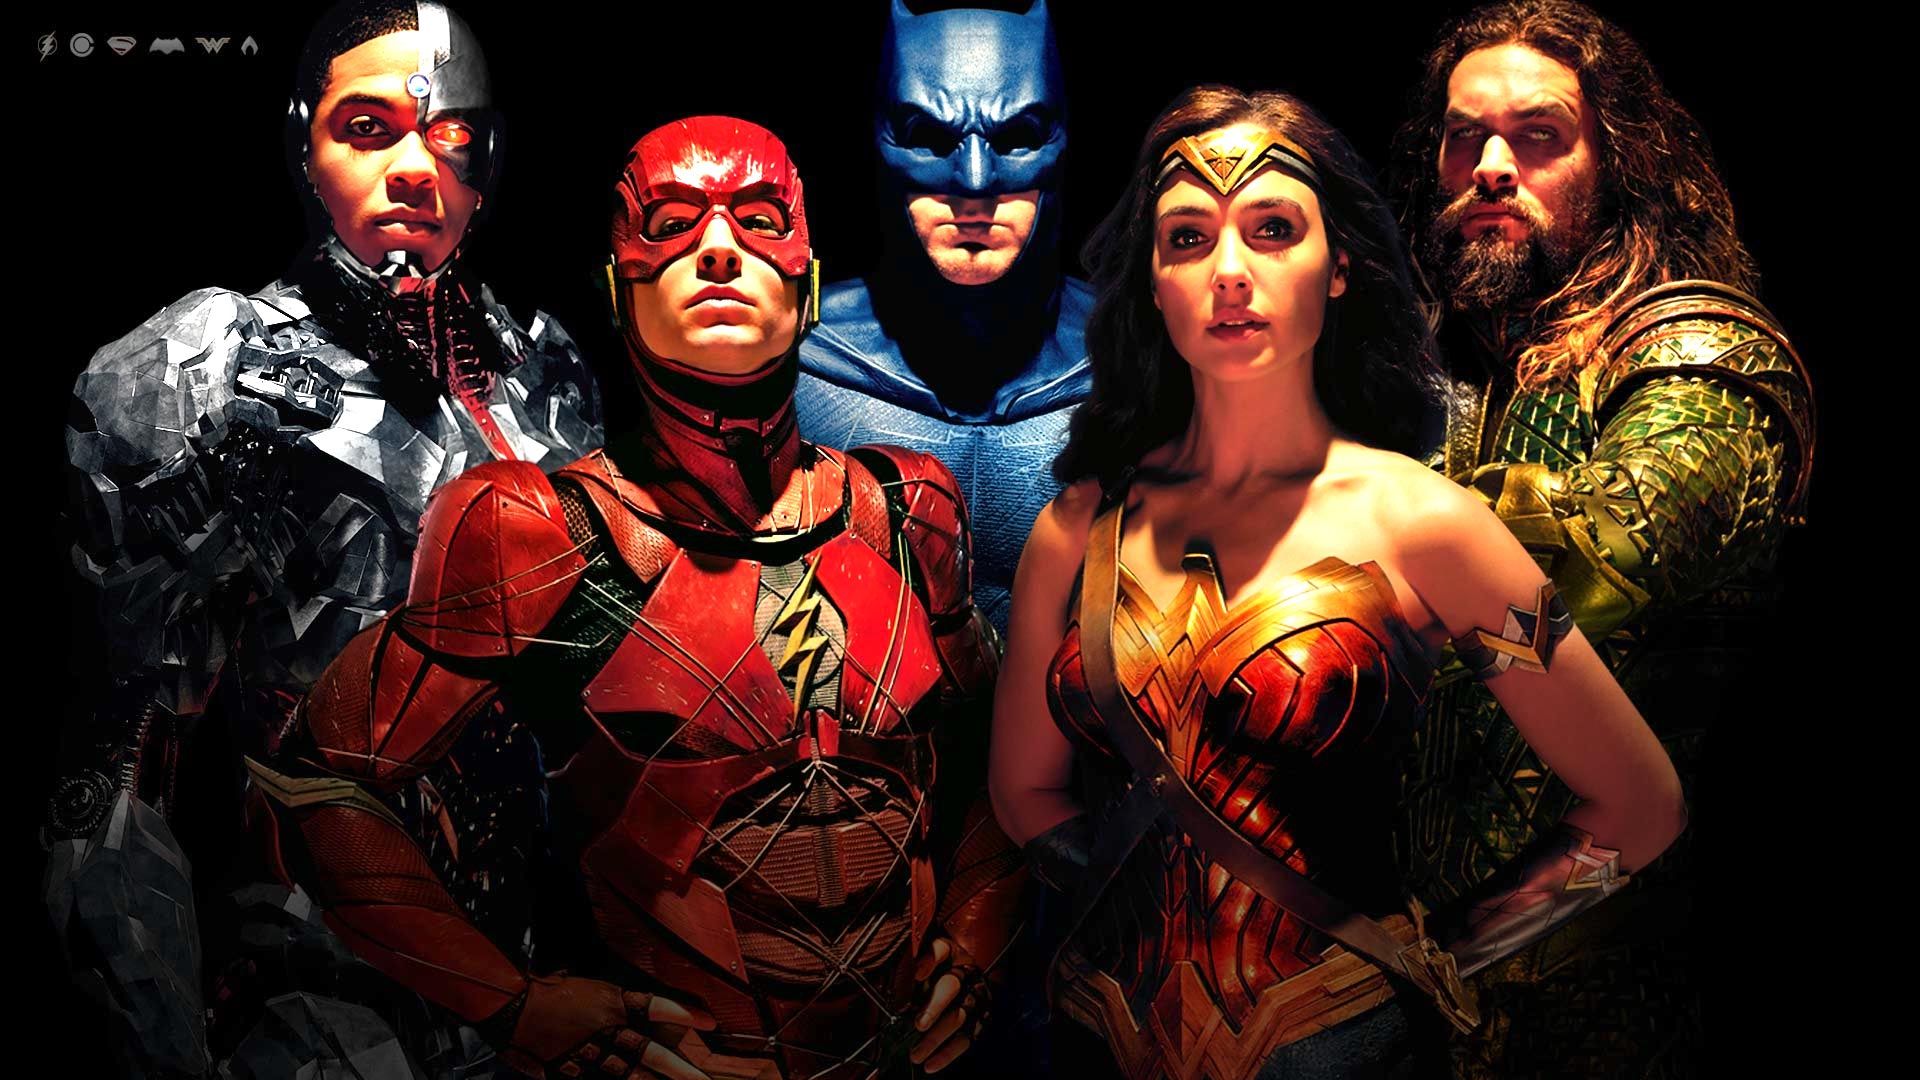 Justice League 2': Zack Snyder may have revealed trippy sequel plans